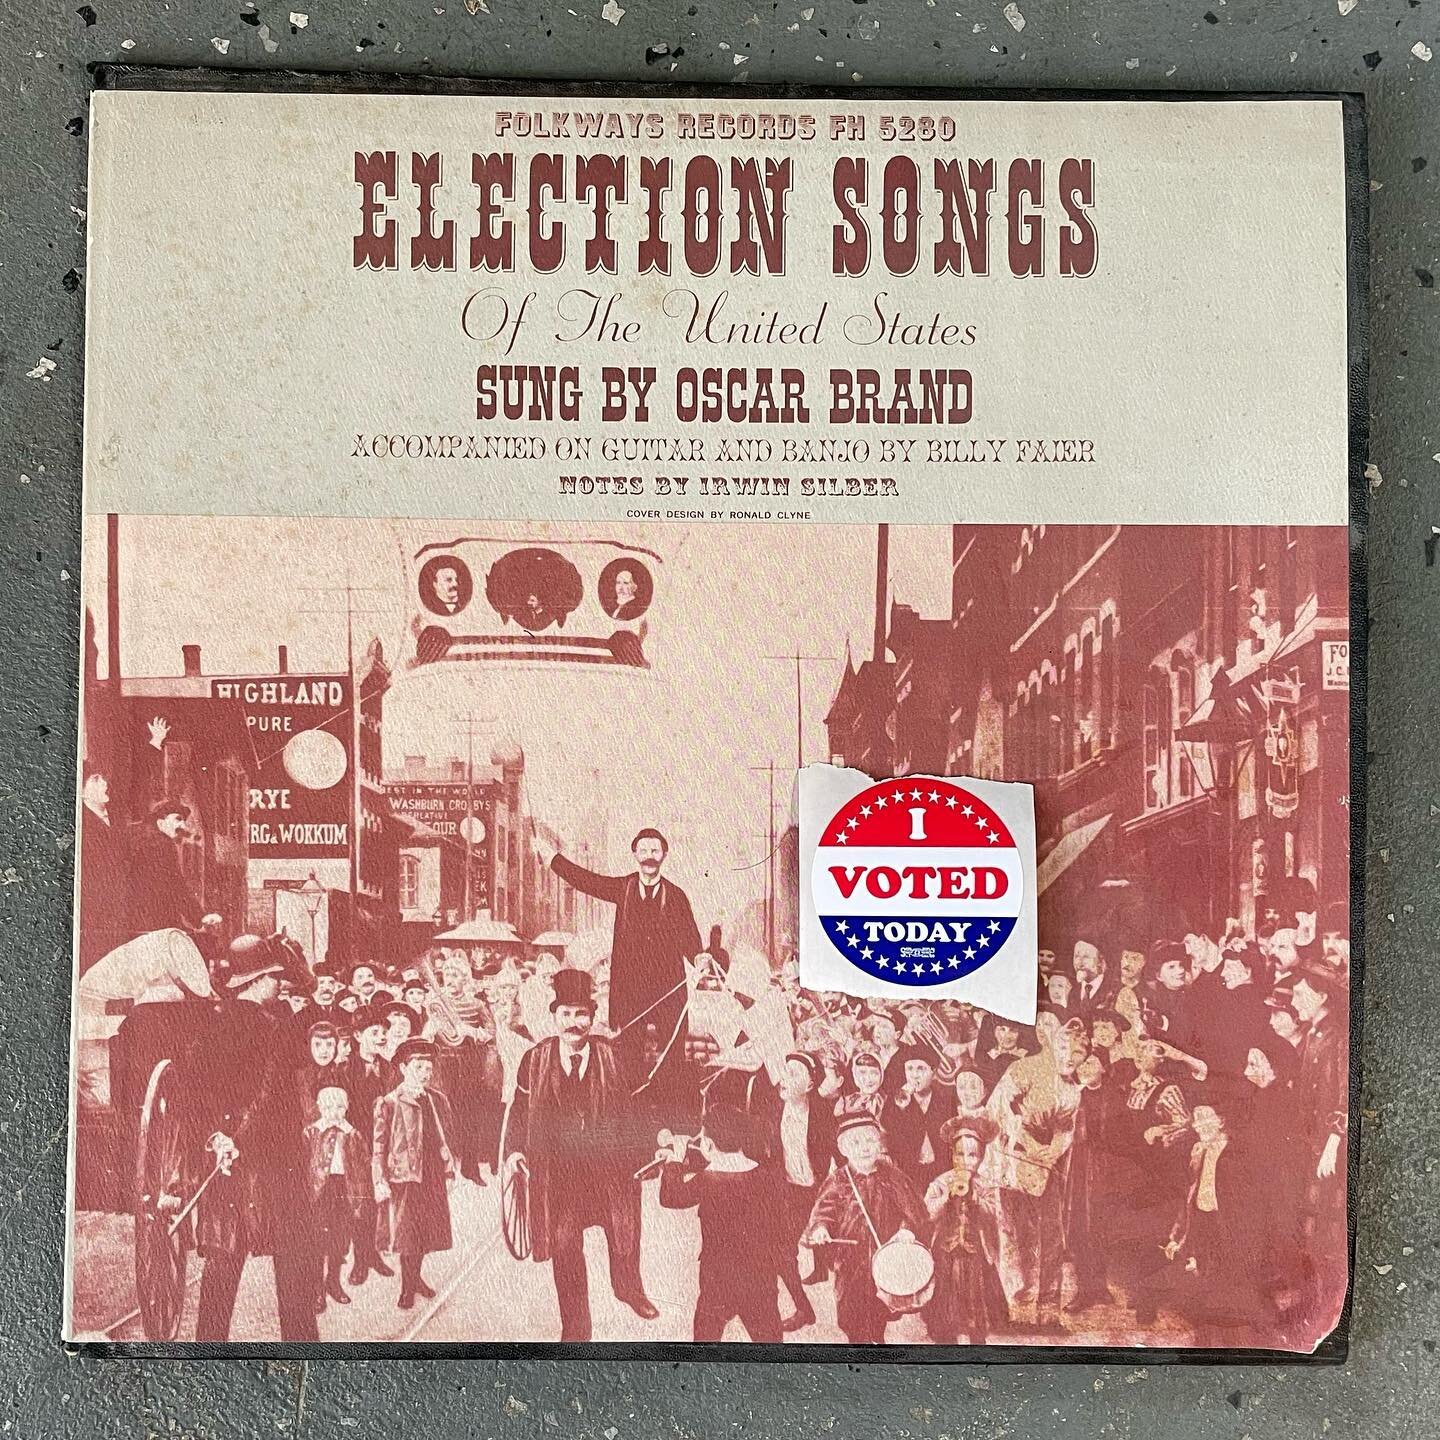 Todays the day! Get out and do the thing! @smithsonian #folkways #electionday #electionsongs #oscarbrand #civicduty #ivoted #desmoines #dsmia